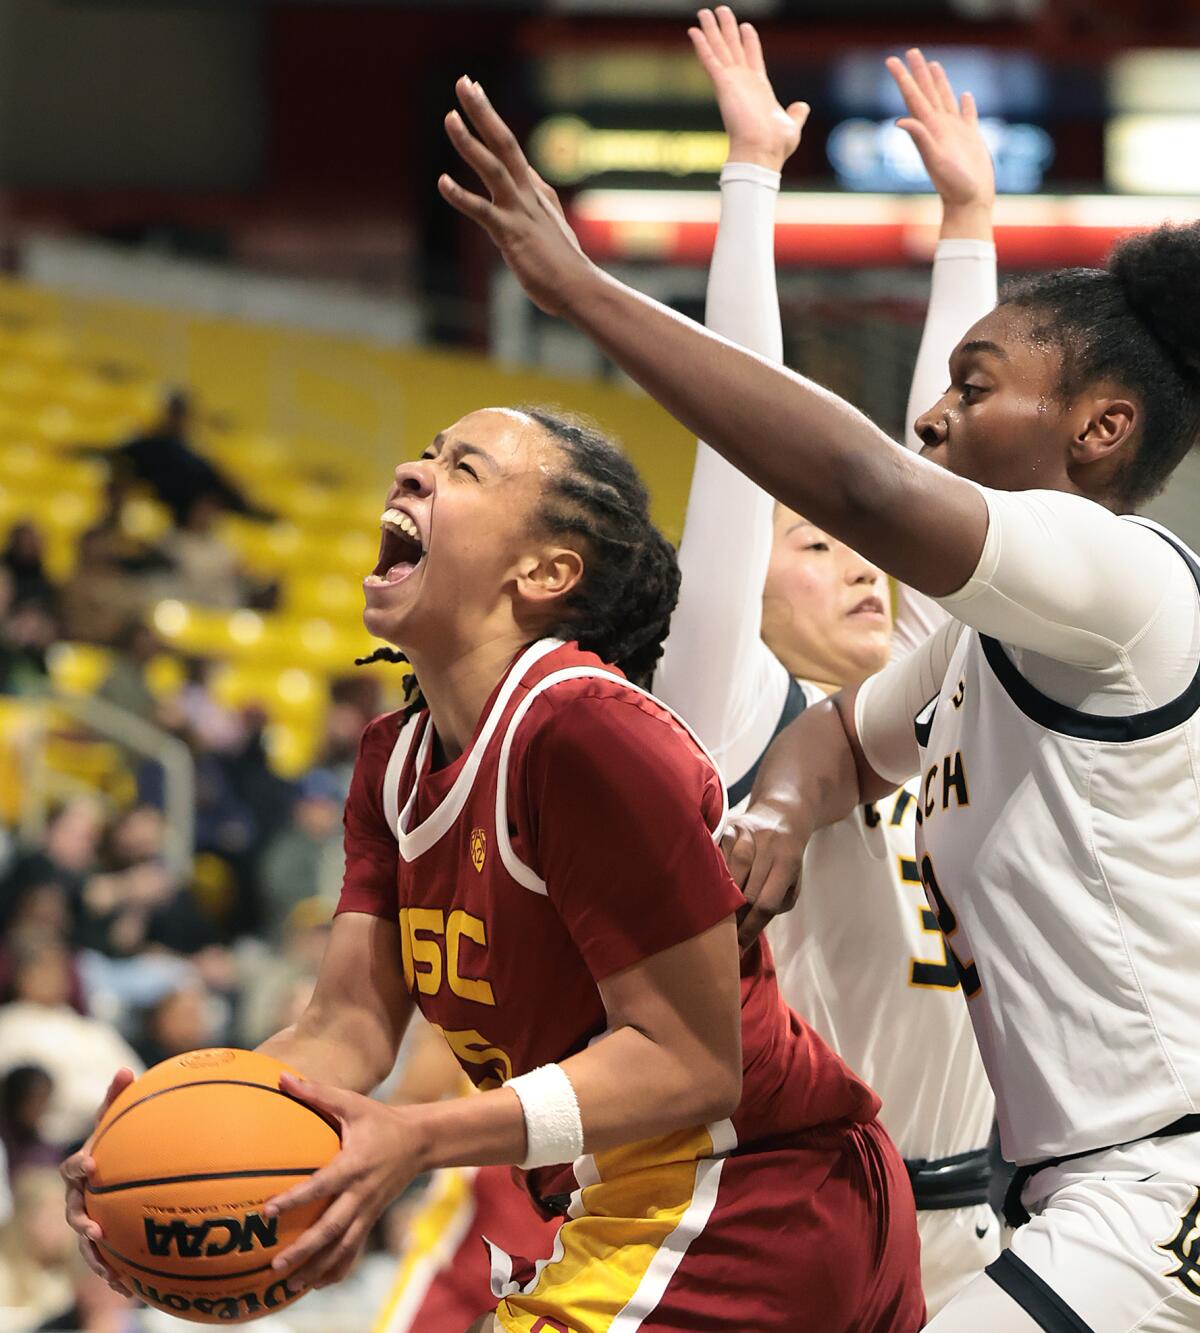 USC's McKenzie Forbes drives past the Long Beach State defense in the second quarter.